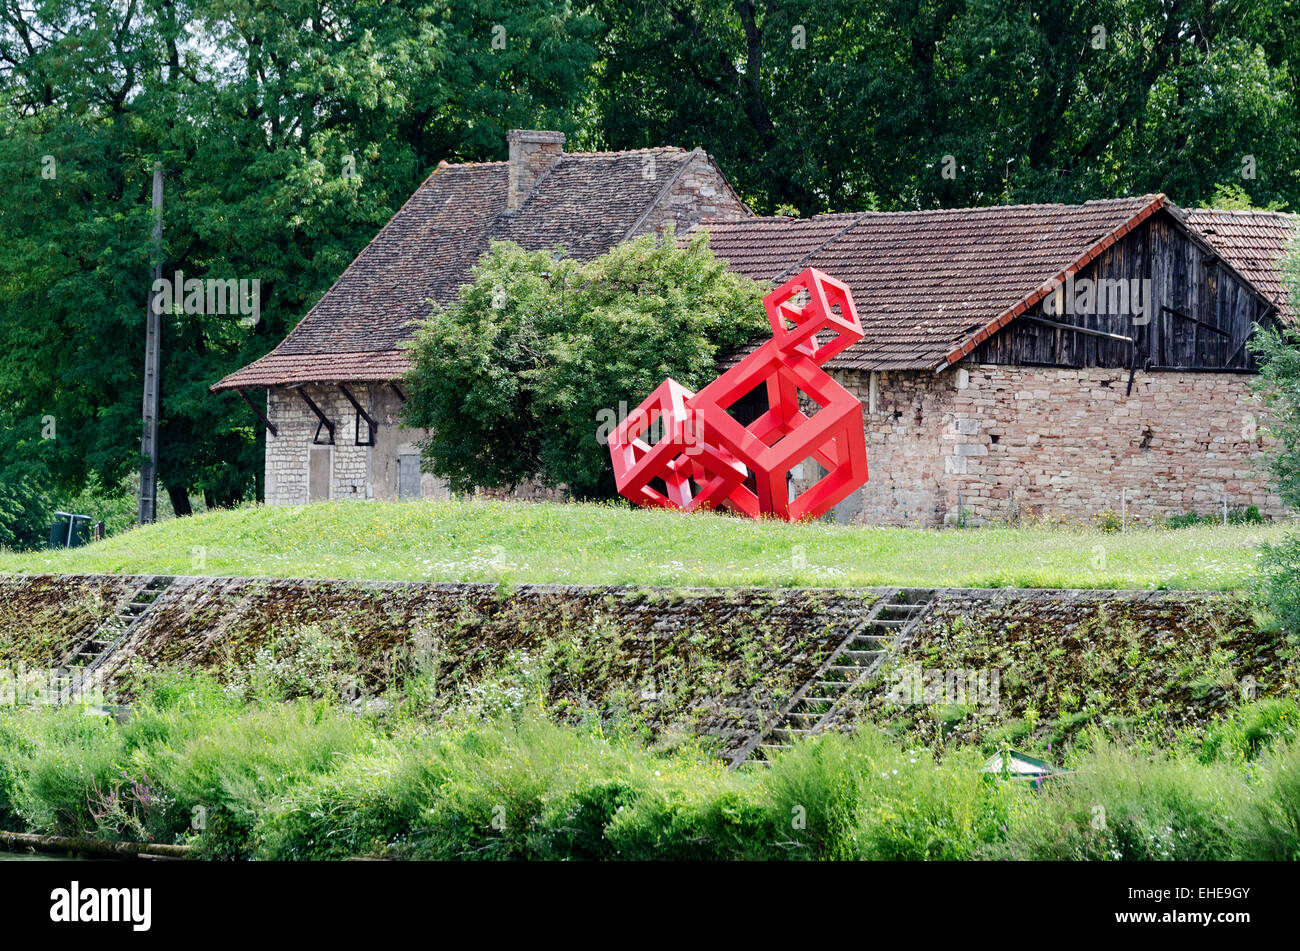 'Oui,' a sculpture by Jean-François Coadou, is in stark contrast to its bucolic setting on the banks of the Saône River, France. Stock Photo